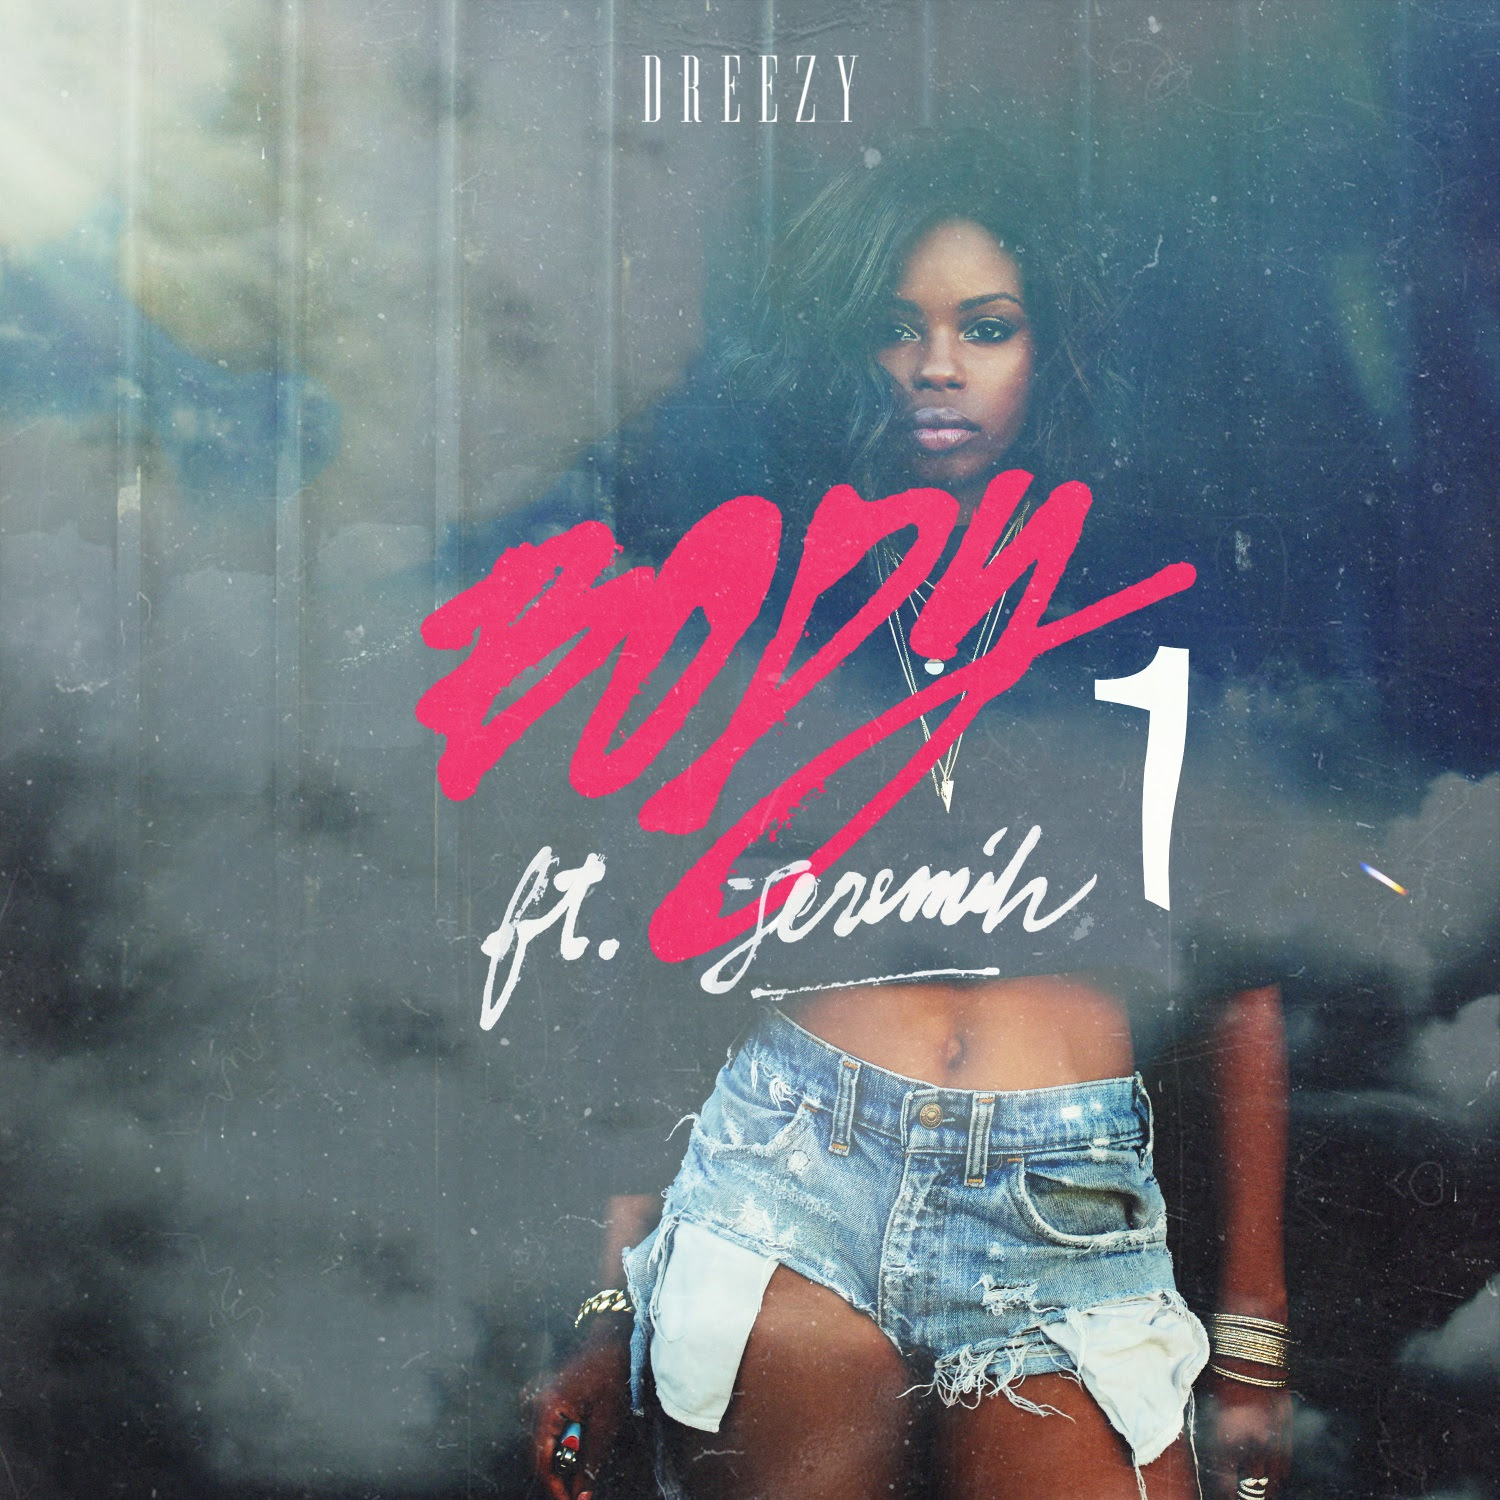 Dreezy streams "Body" featuring Jeremih. The track was produced by Blood Diamonds